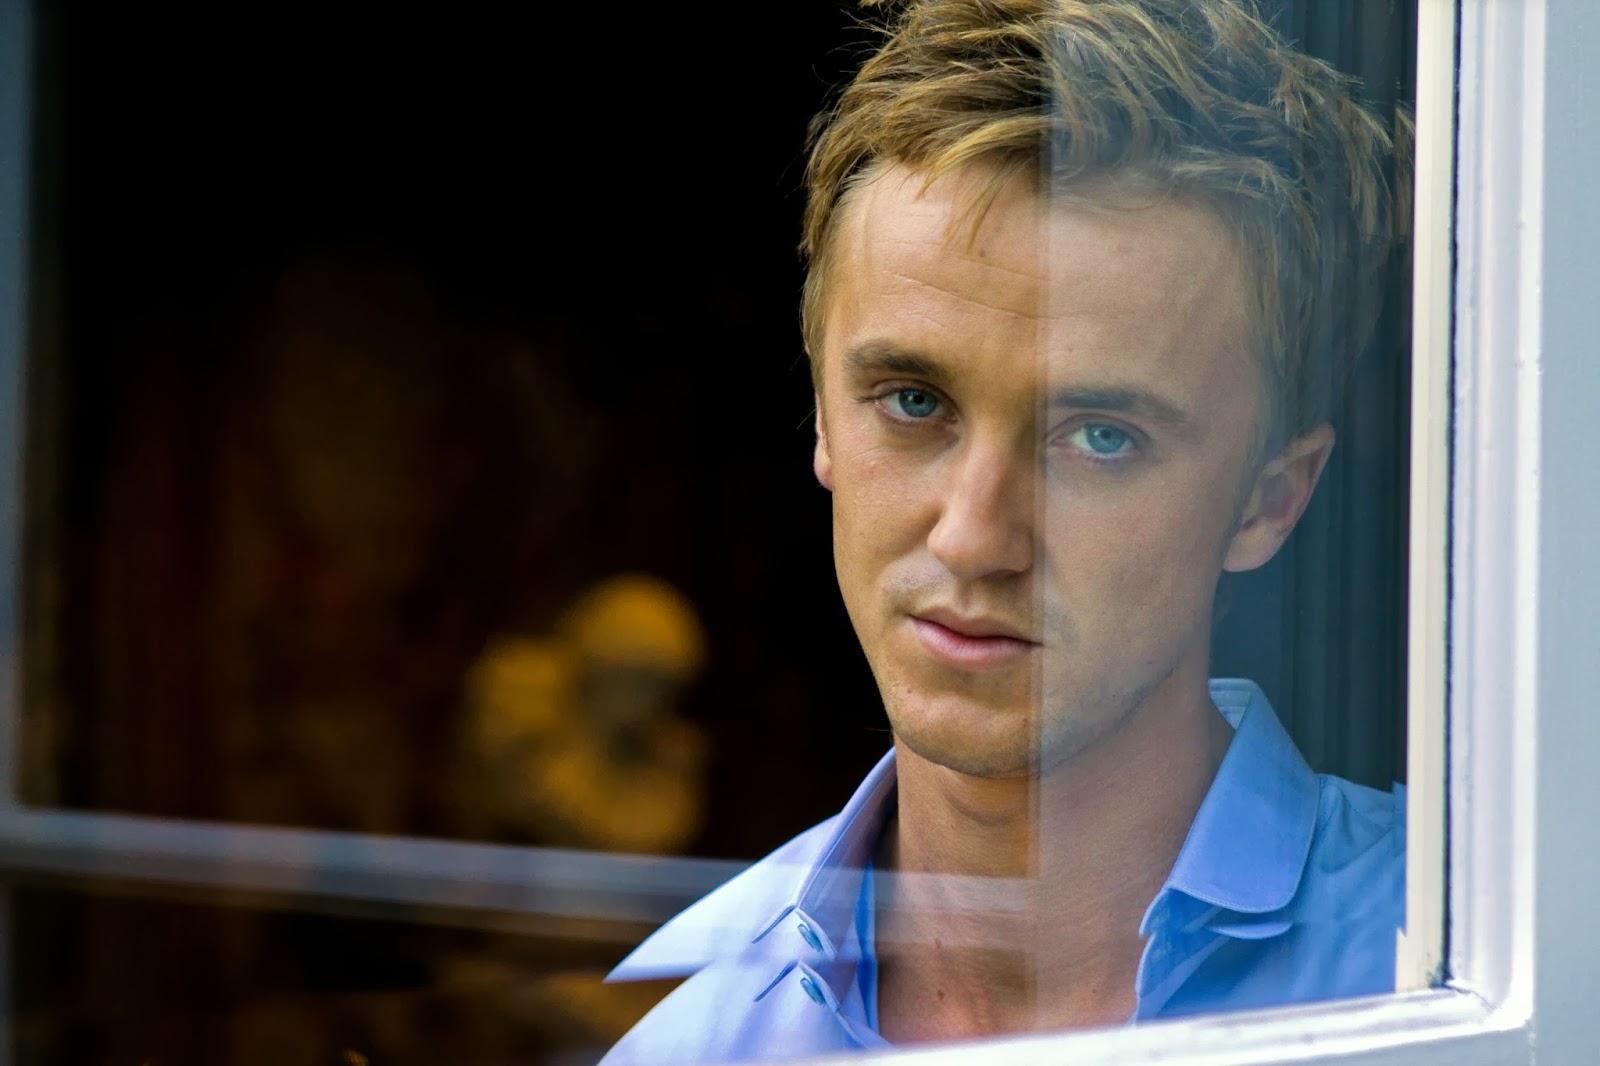 ALL ABOUT HOLLYWOOD STARS: Tom Felton HD Wallpaper 2013